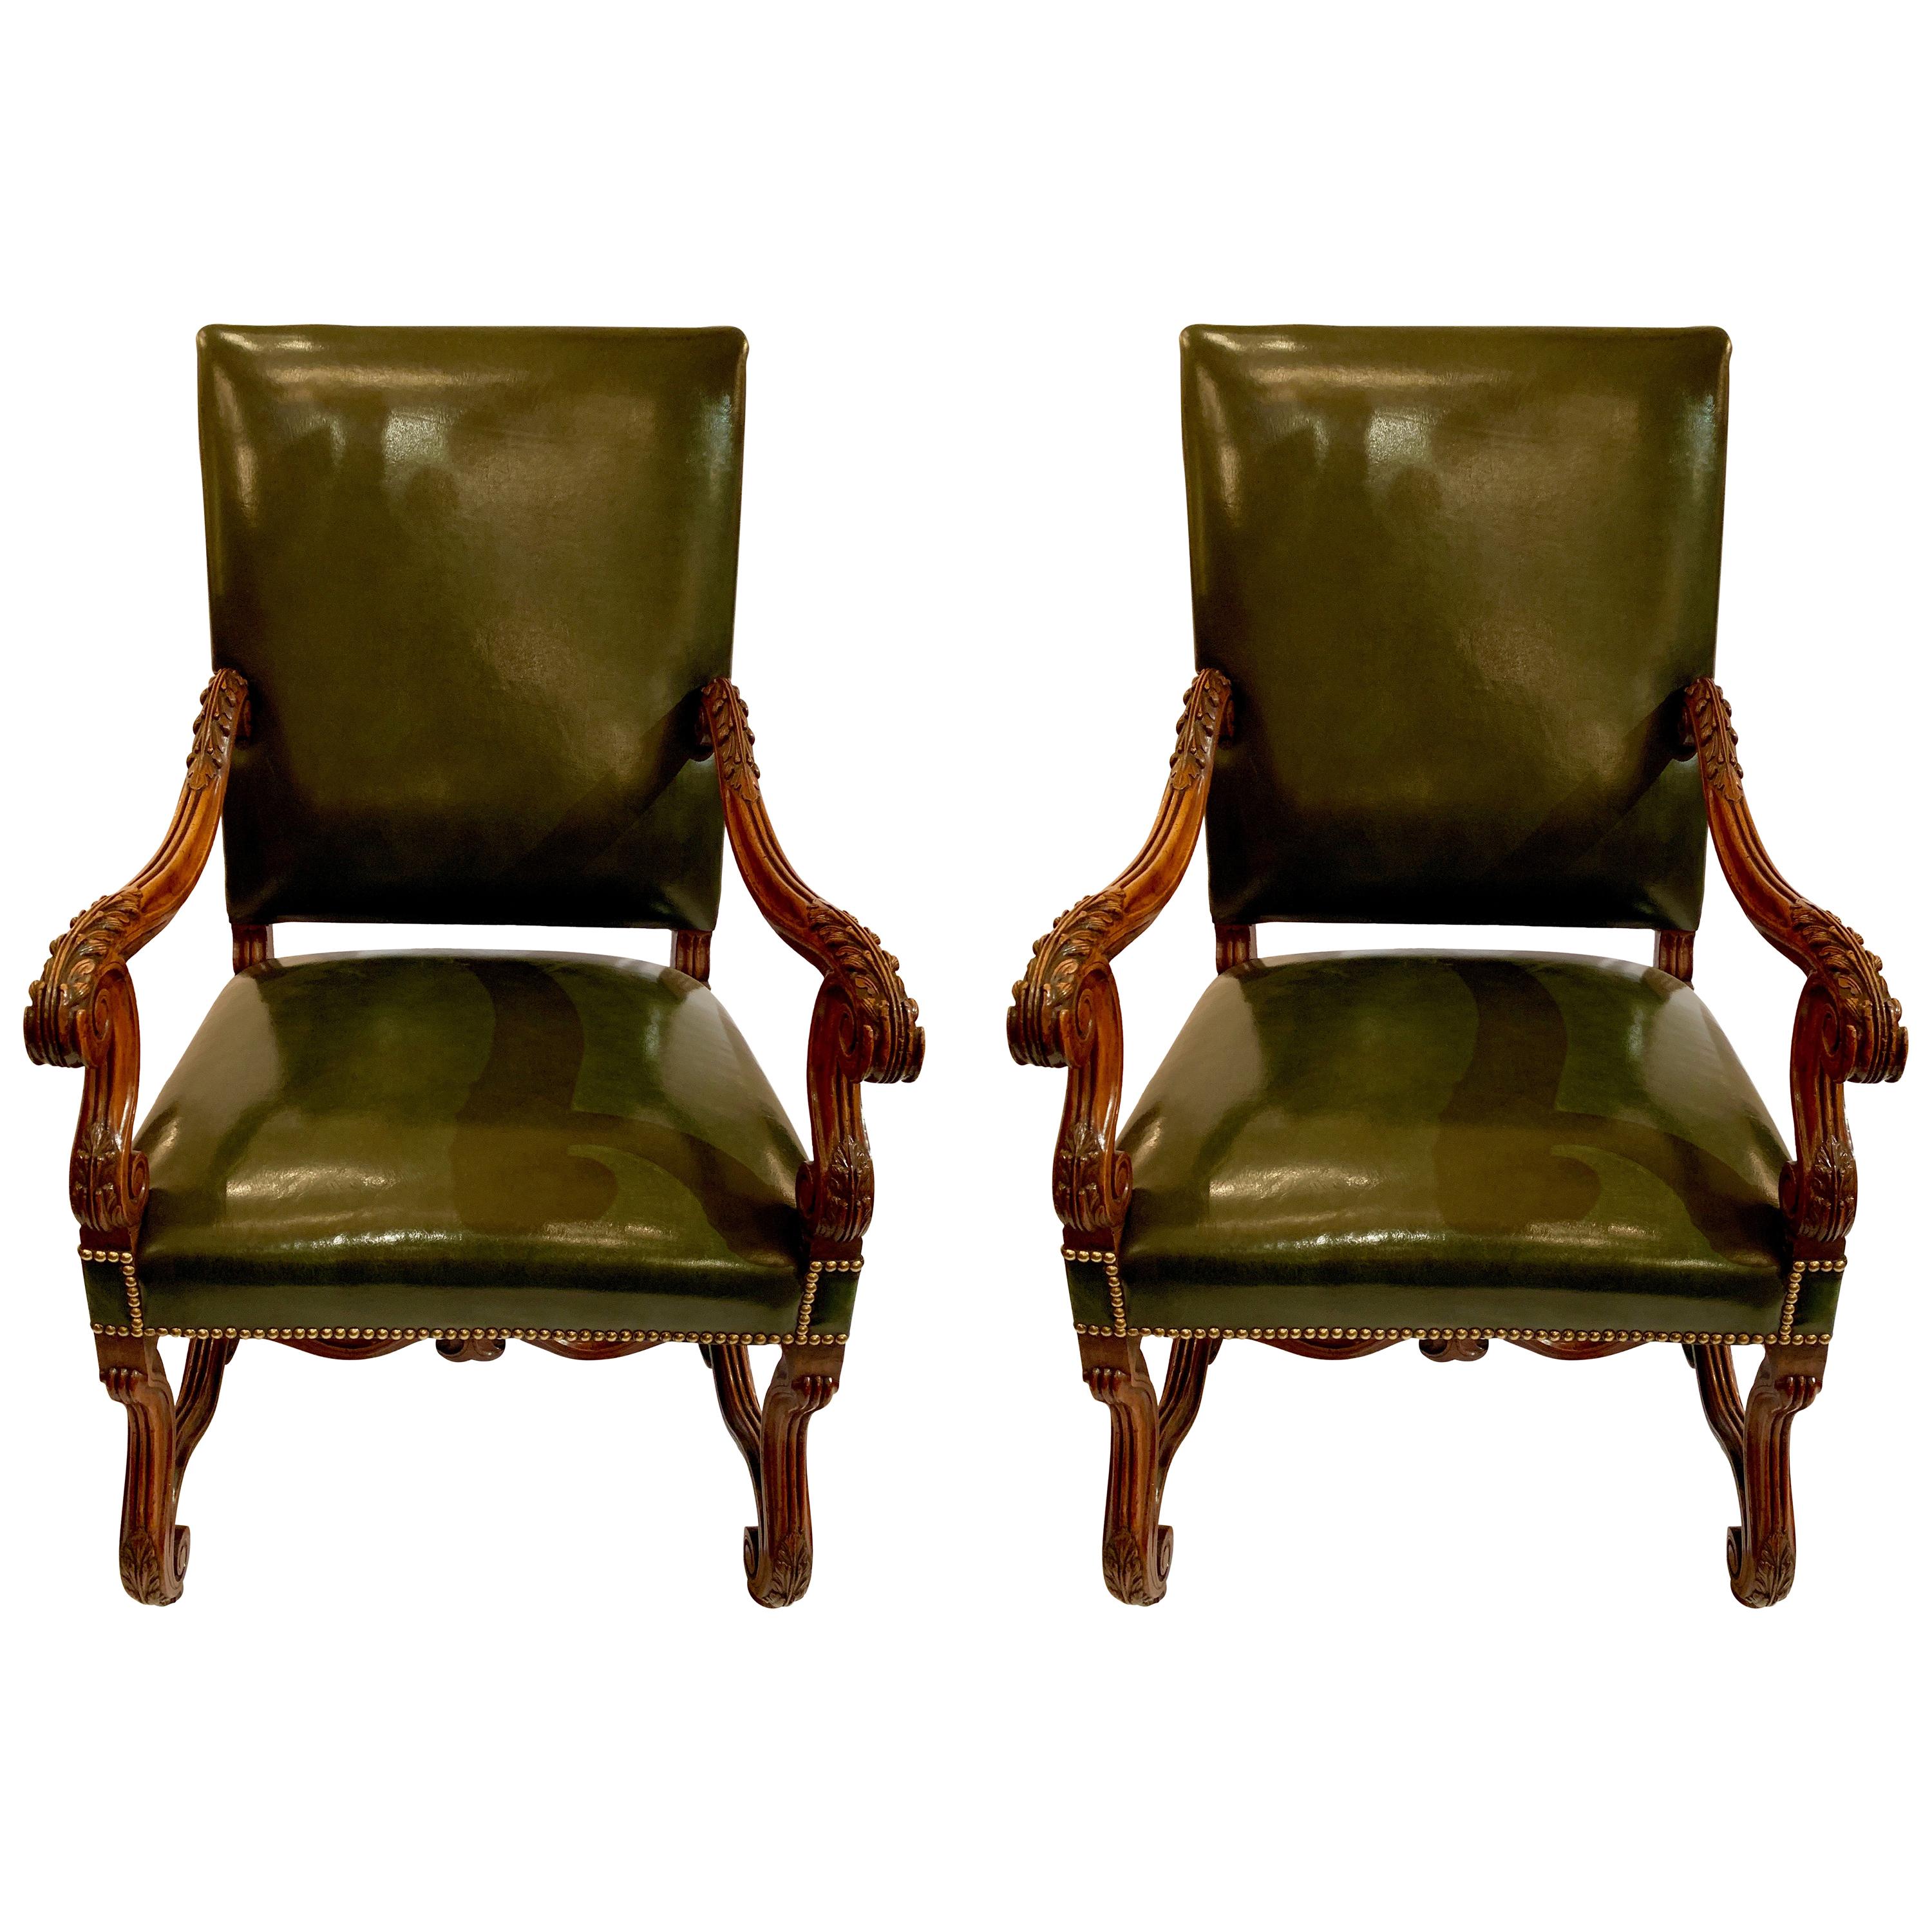 Pair of Antique French Walnut François I Armchairs